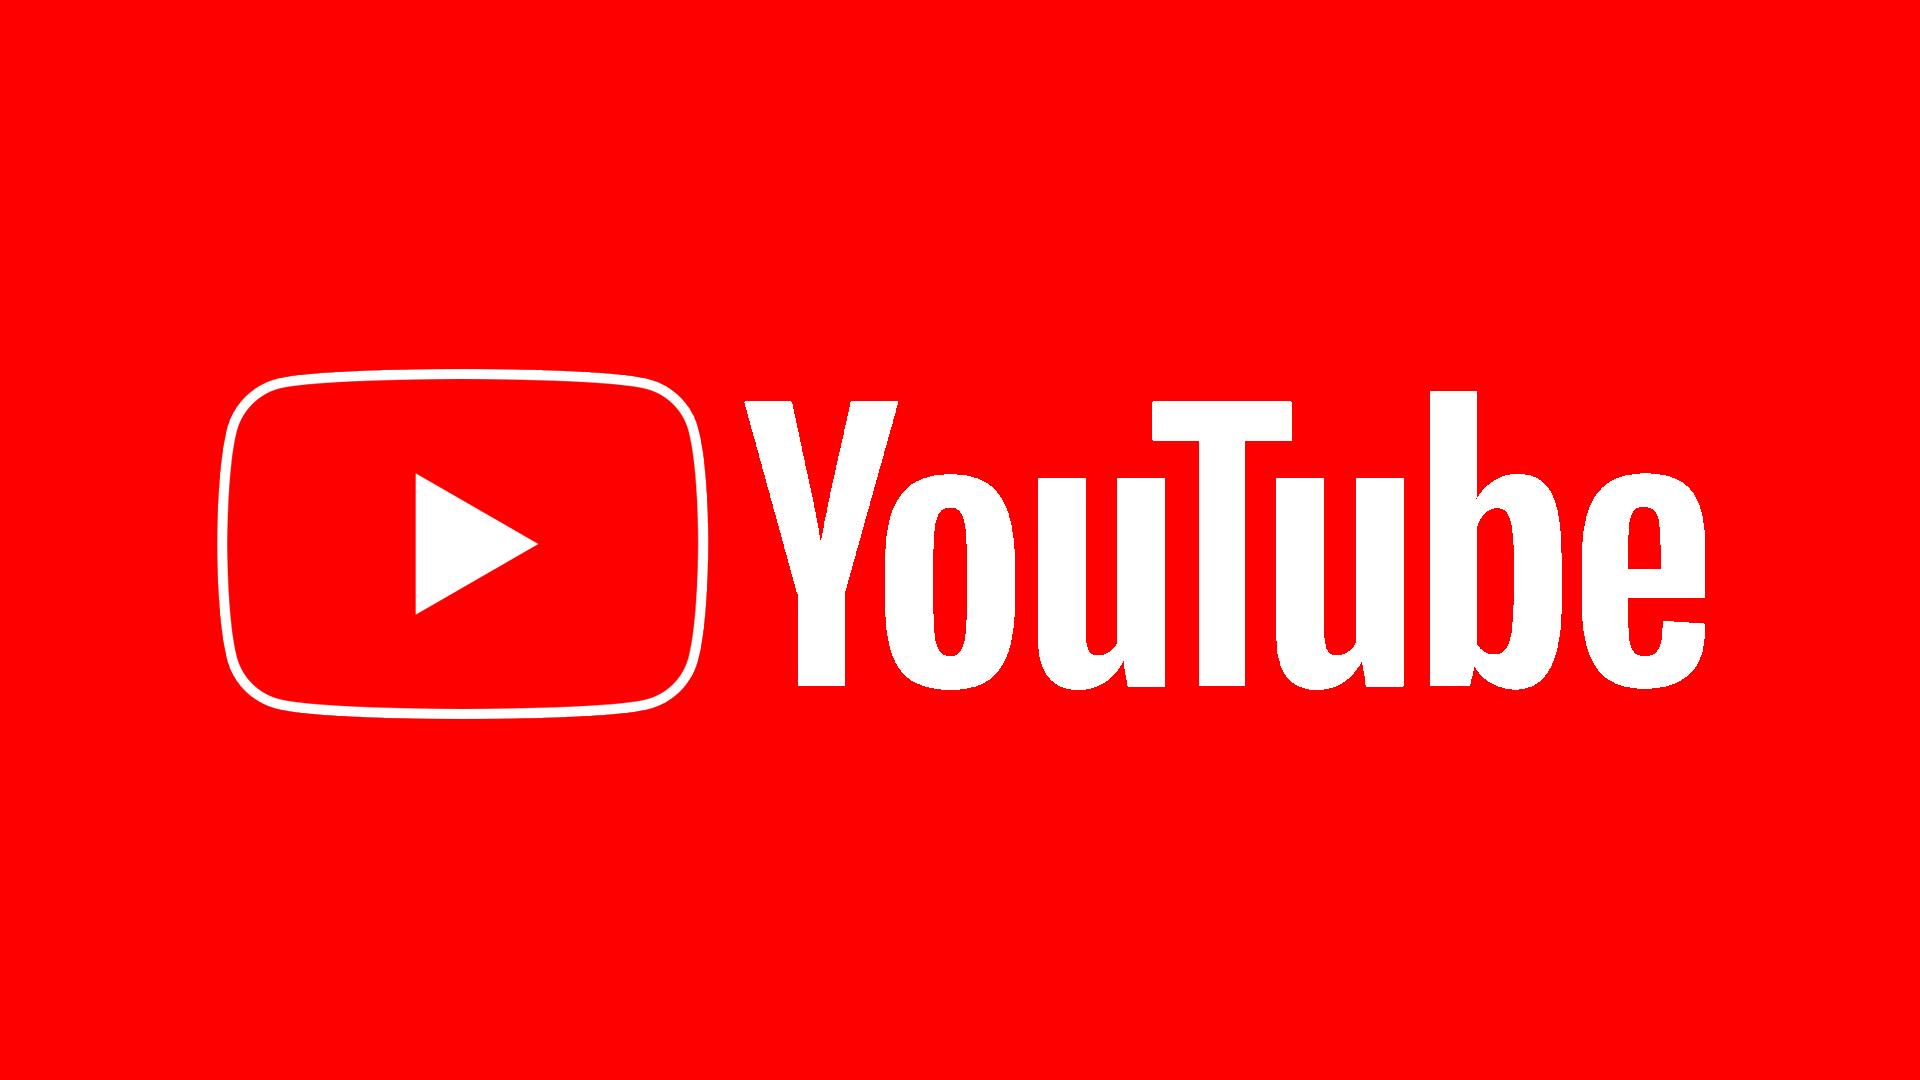 The YouTube logo as of 2019.